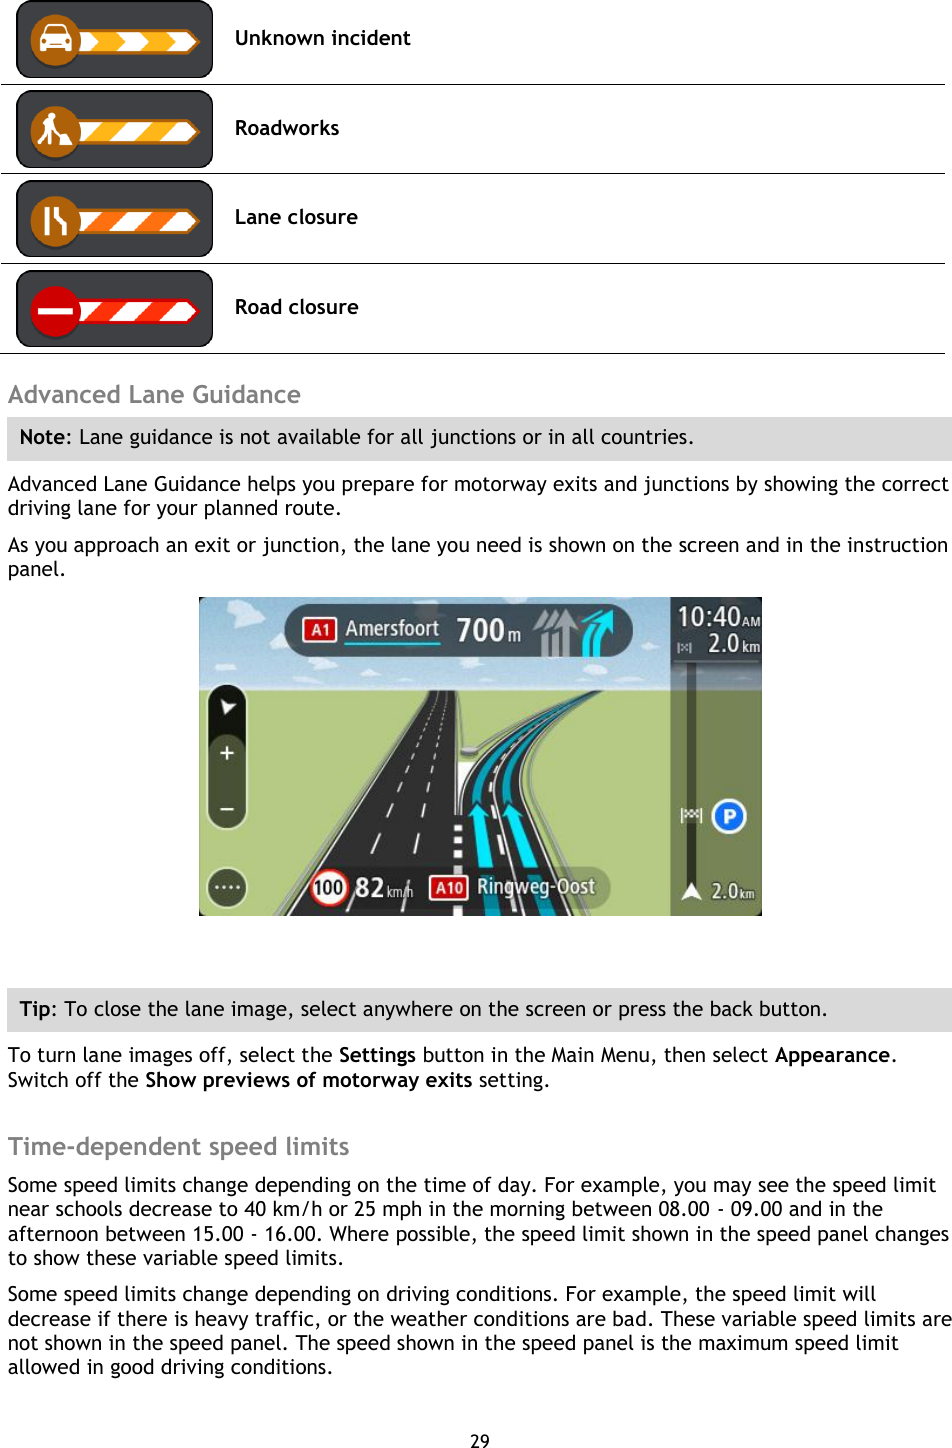 29     Unknown incident  Roadworks  Lane closure  Road closure  Advanced Lane Guidance Note: Lane guidance is not available for all junctions or in all countries. Advanced Lane Guidance helps you prepare for motorway exits and junctions by showing the correct driving lane for your planned route. As you approach an exit or junction, the lane you need is shown on the screen and in the instruction panel.   Tip: To close the lane image, select anywhere on the screen or press the back button. To turn lane images off, select the Settings button in the Main Menu, then select Appearance. Switch off the Show previews of motorway exits setting.  Time-dependent speed limits Some speed limits change depending on the time of day. For example, you may see the speed limit near schools decrease to 40 km/h or 25 mph in the morning between 08.00 - 09.00 and in the afternoon between 15.00 - 16.00. Where possible, the speed limit shown in the speed panel changes to show these variable speed limits. Some speed limits change depending on driving conditions. For example, the speed limit will decrease if there is heavy traffic, or the weather conditions are bad. These variable speed limits are not shown in the speed panel. The speed shown in the speed panel is the maximum speed limit allowed in good driving conditions. 